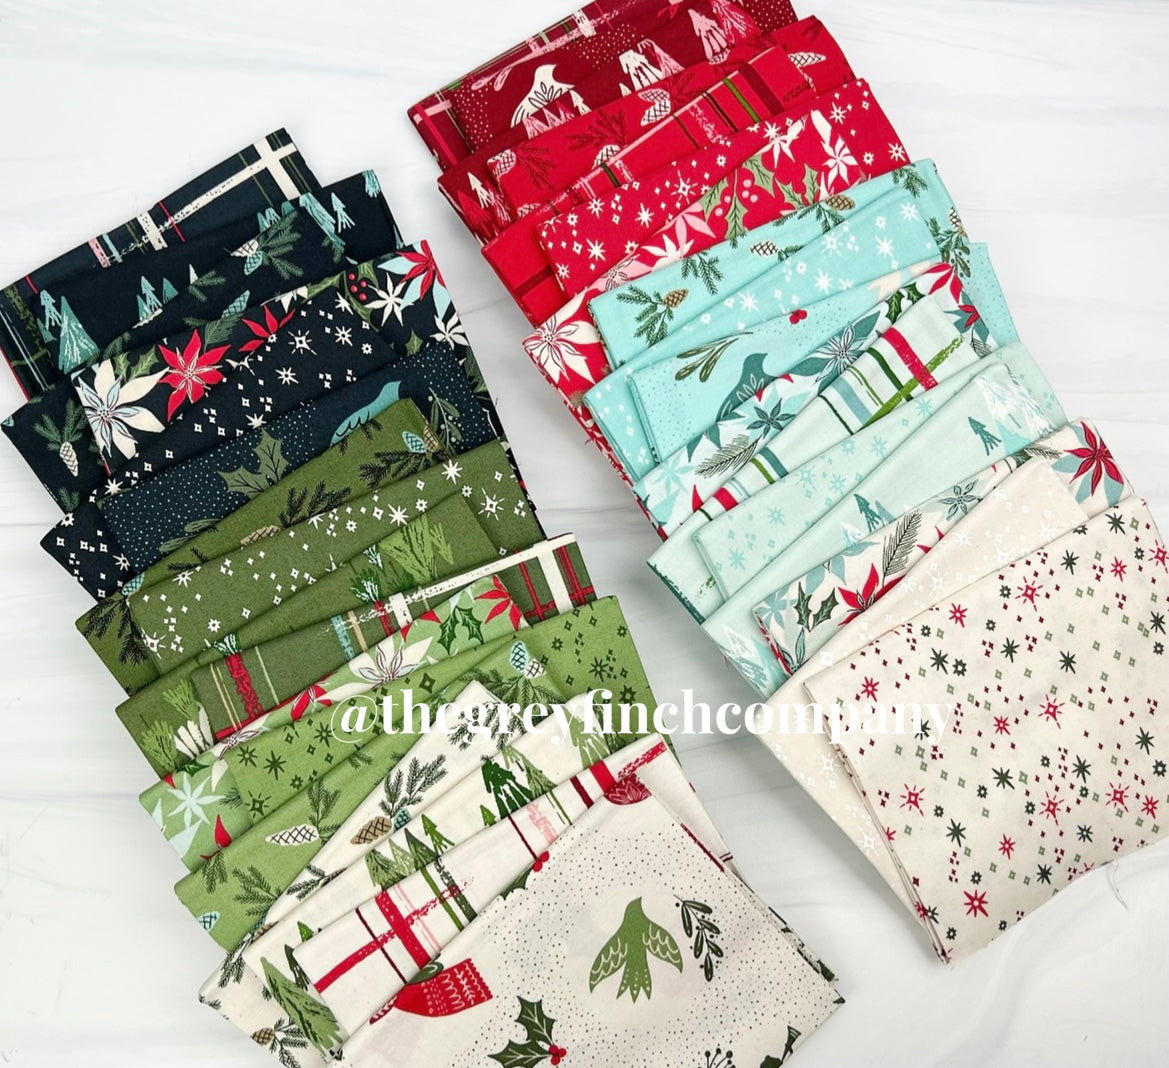 Good News Great Joy Collection Bundle by Fancy That - 34 fabrics